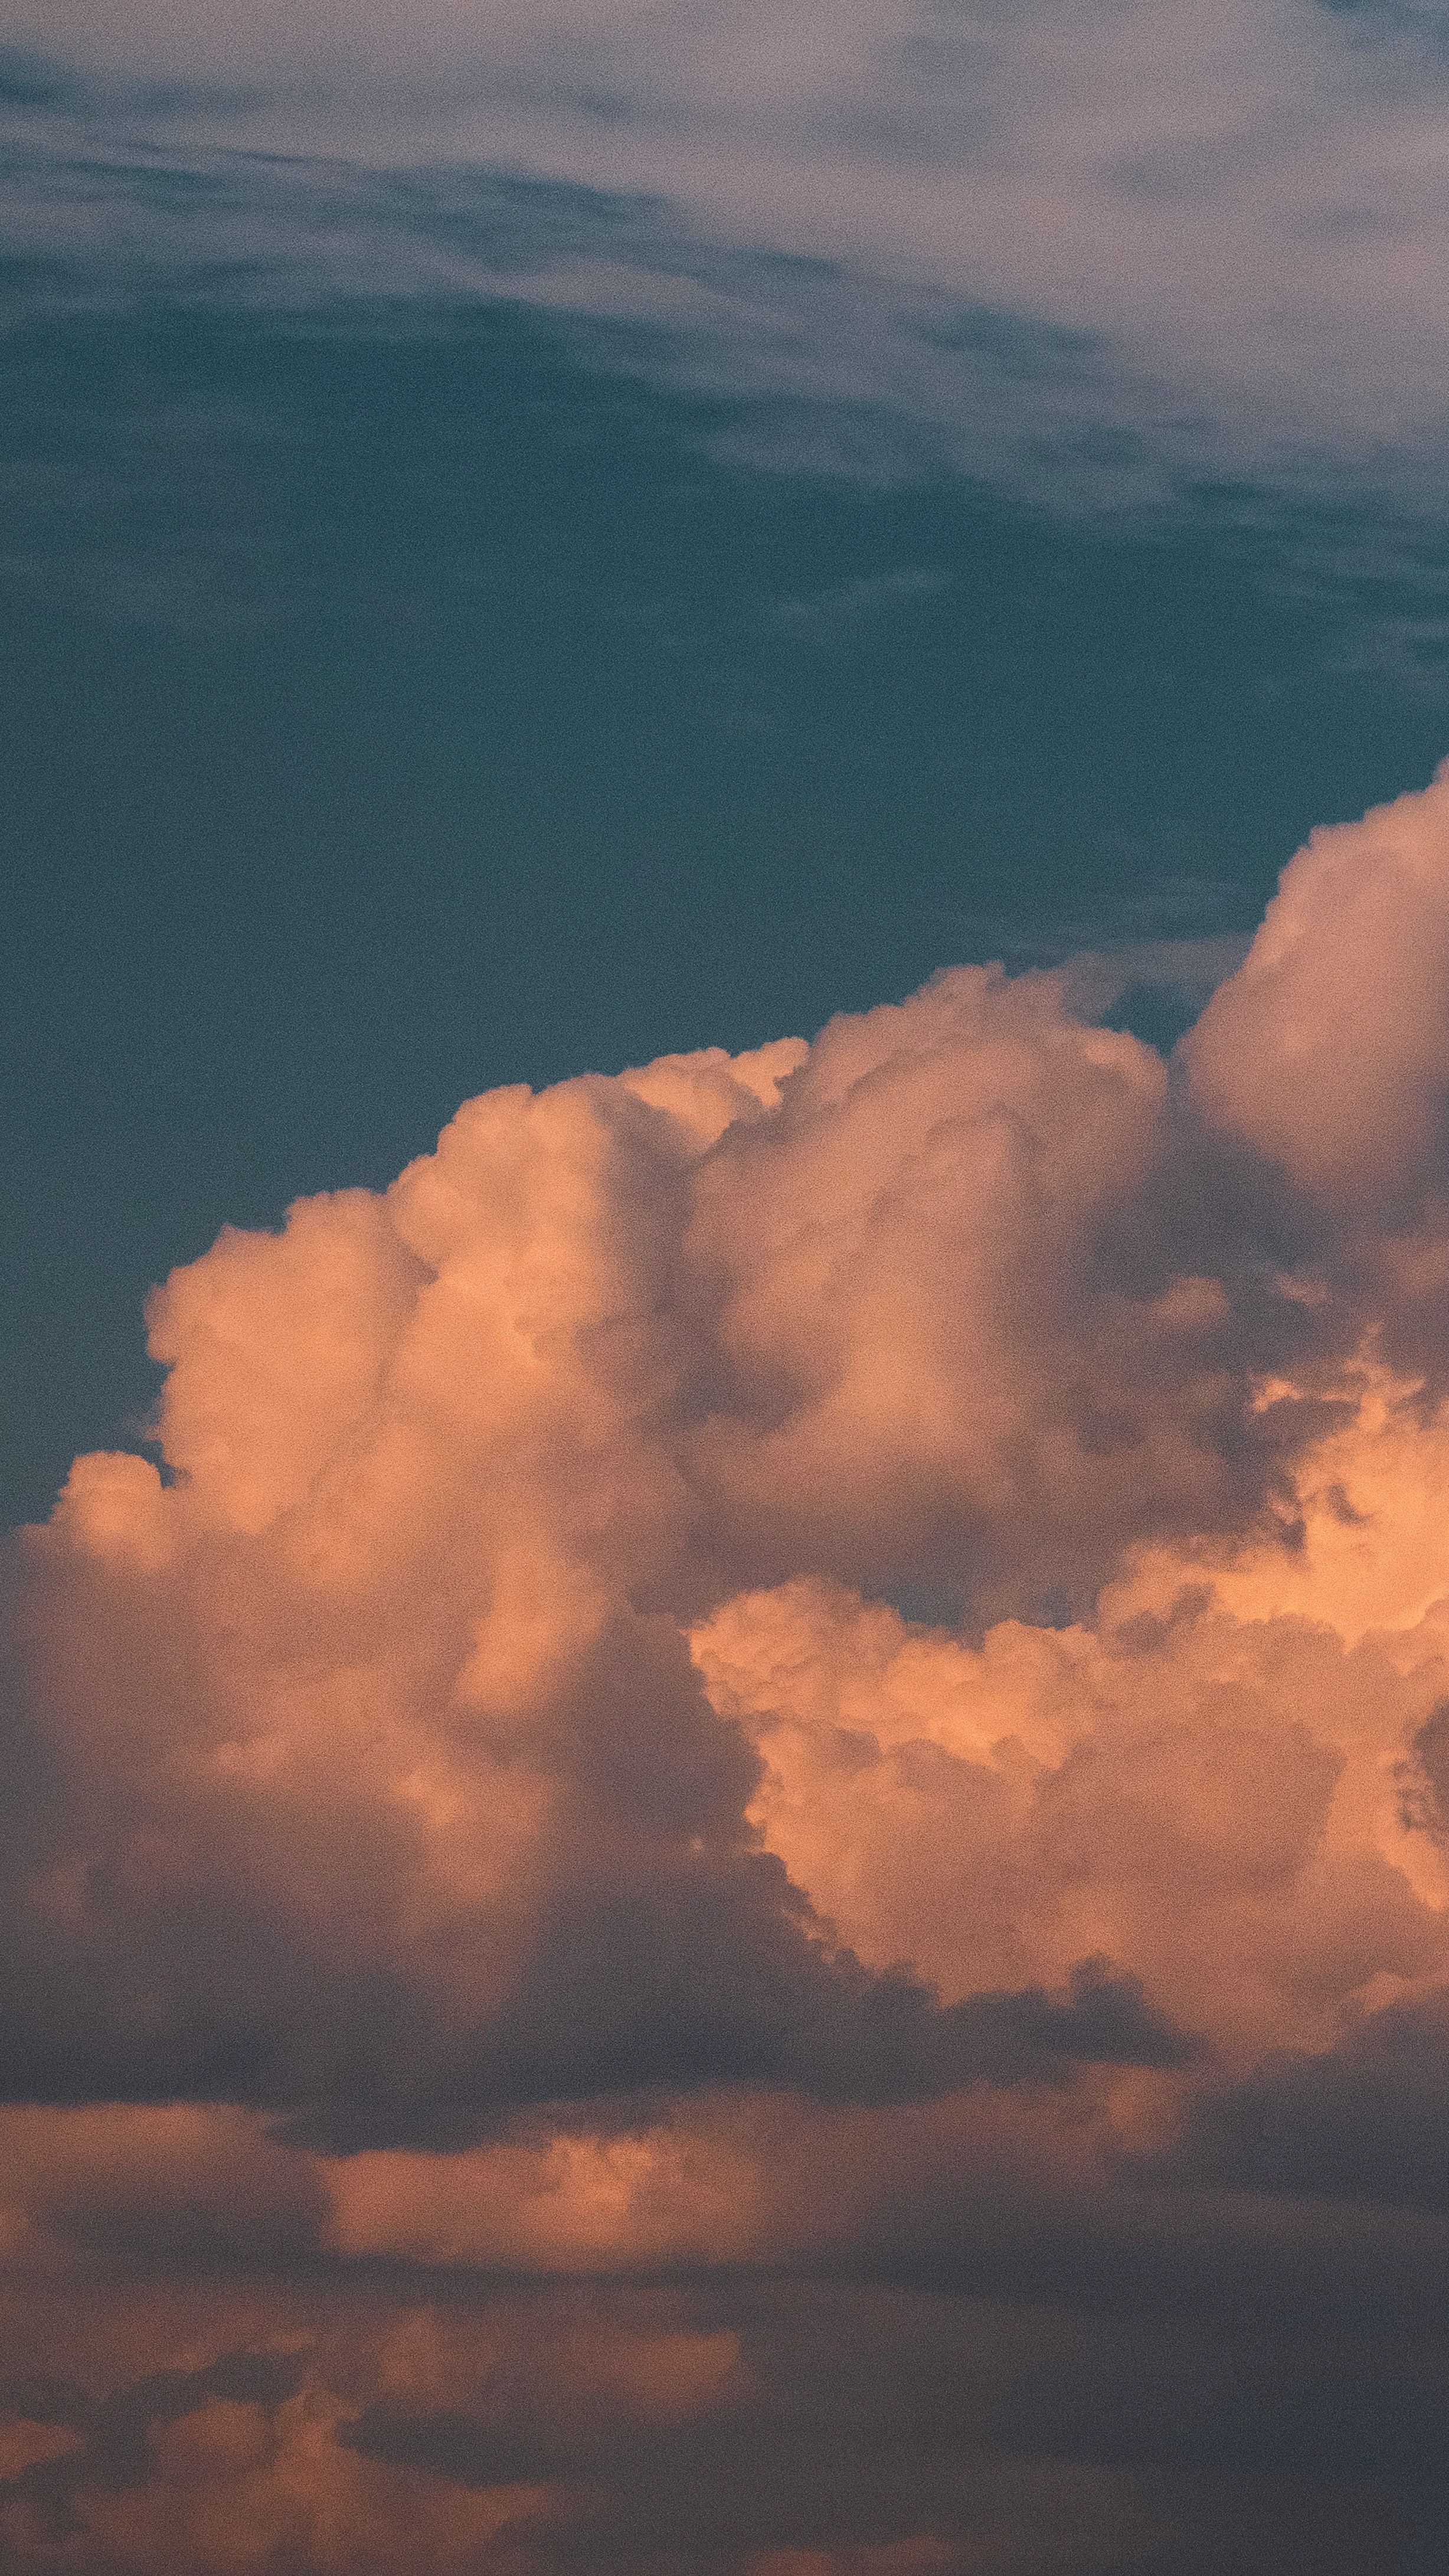 A beautiful photo of a cloud formation in the sky during sunset. - Vintage clouds